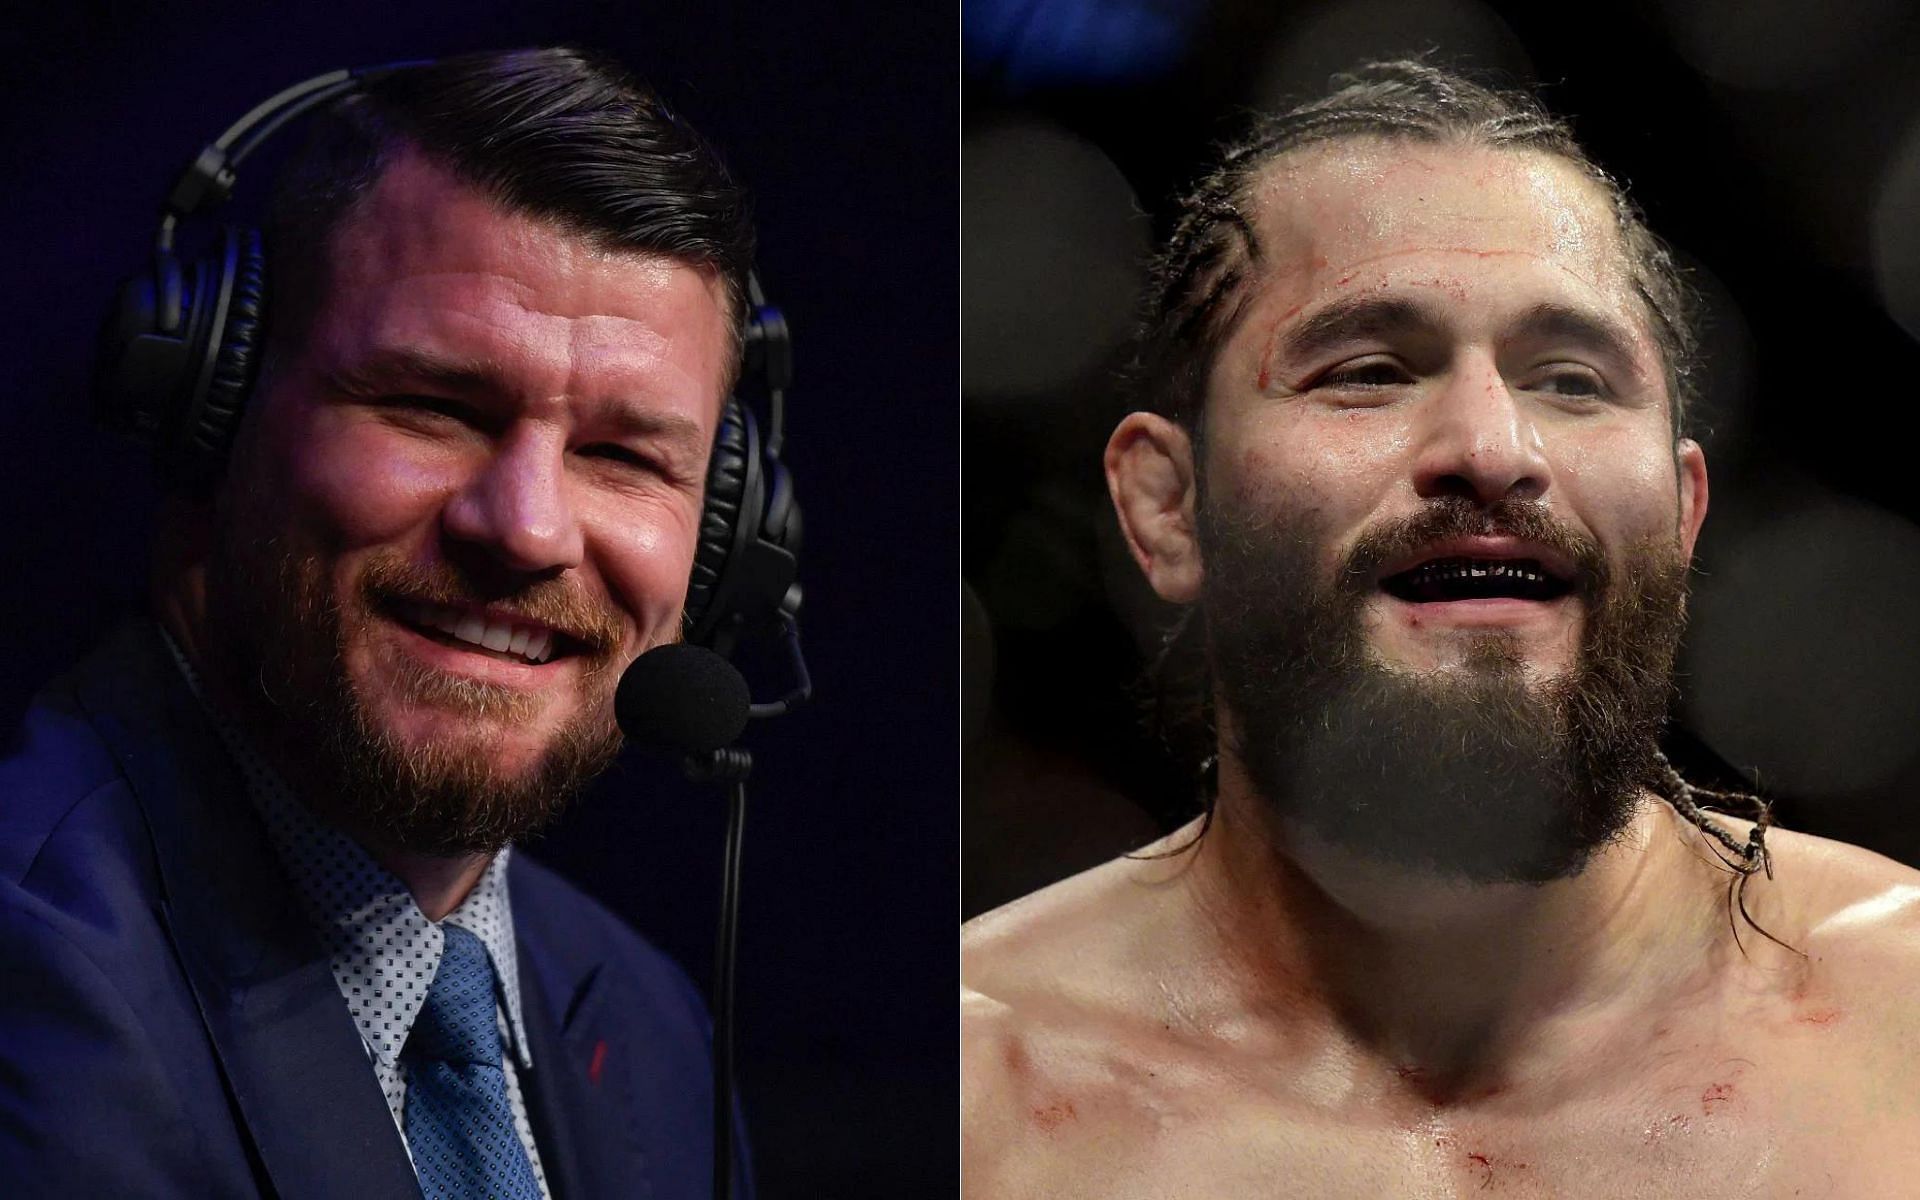 Michael Bisping (left) and Jorge Masvidal (right)